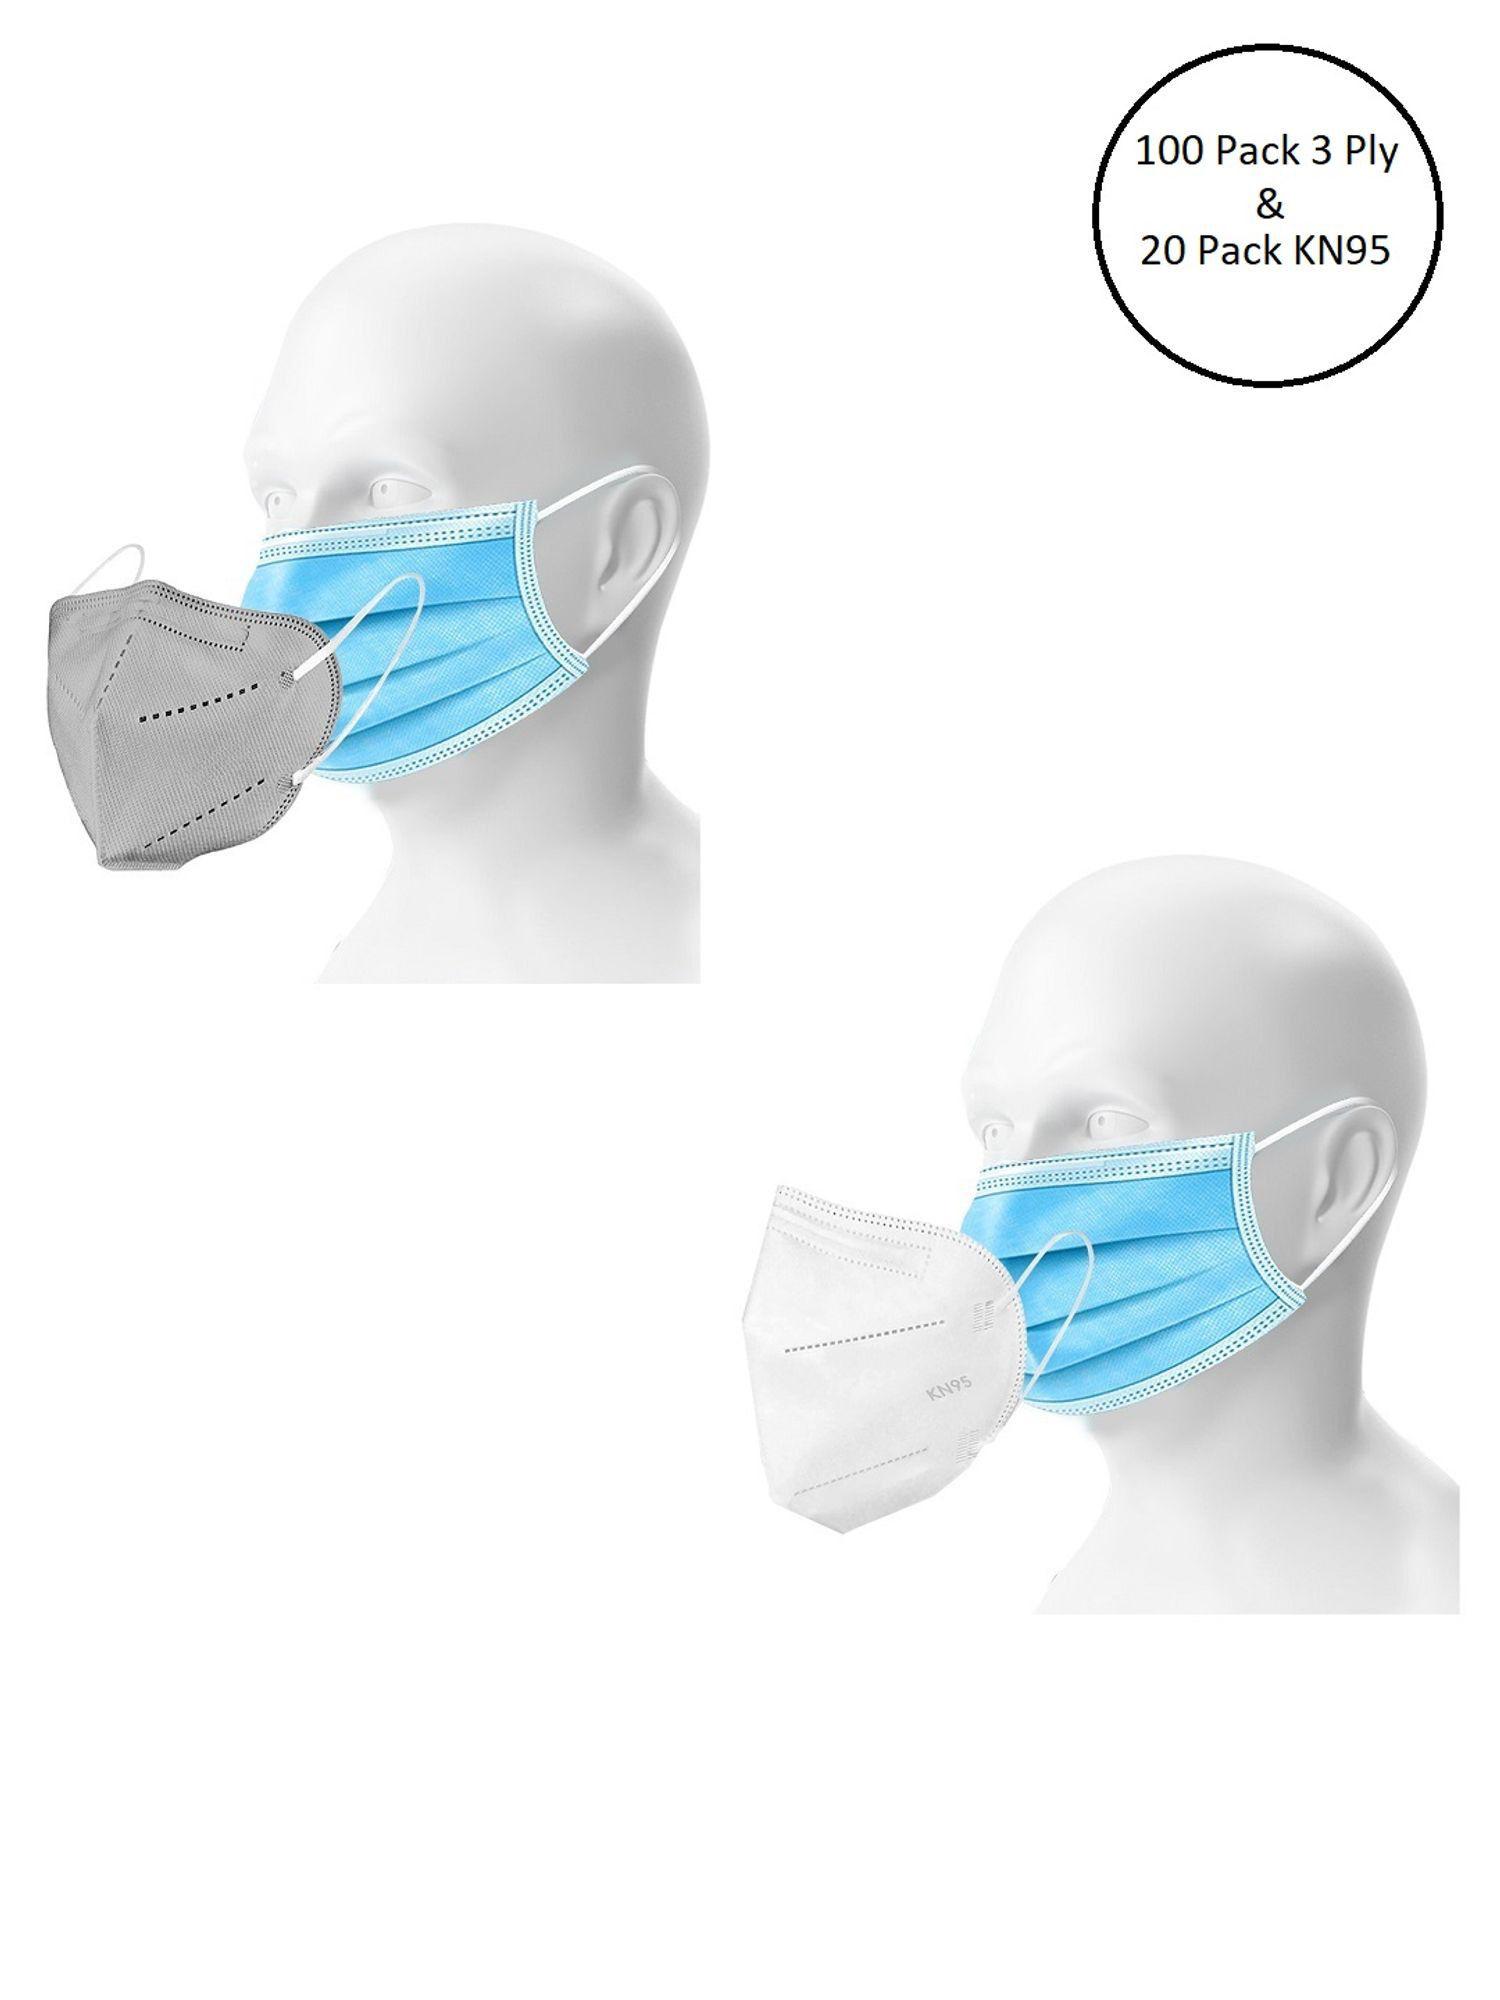 double mask set of 100 disposable 3 ply & 20 kn95 n95 masks